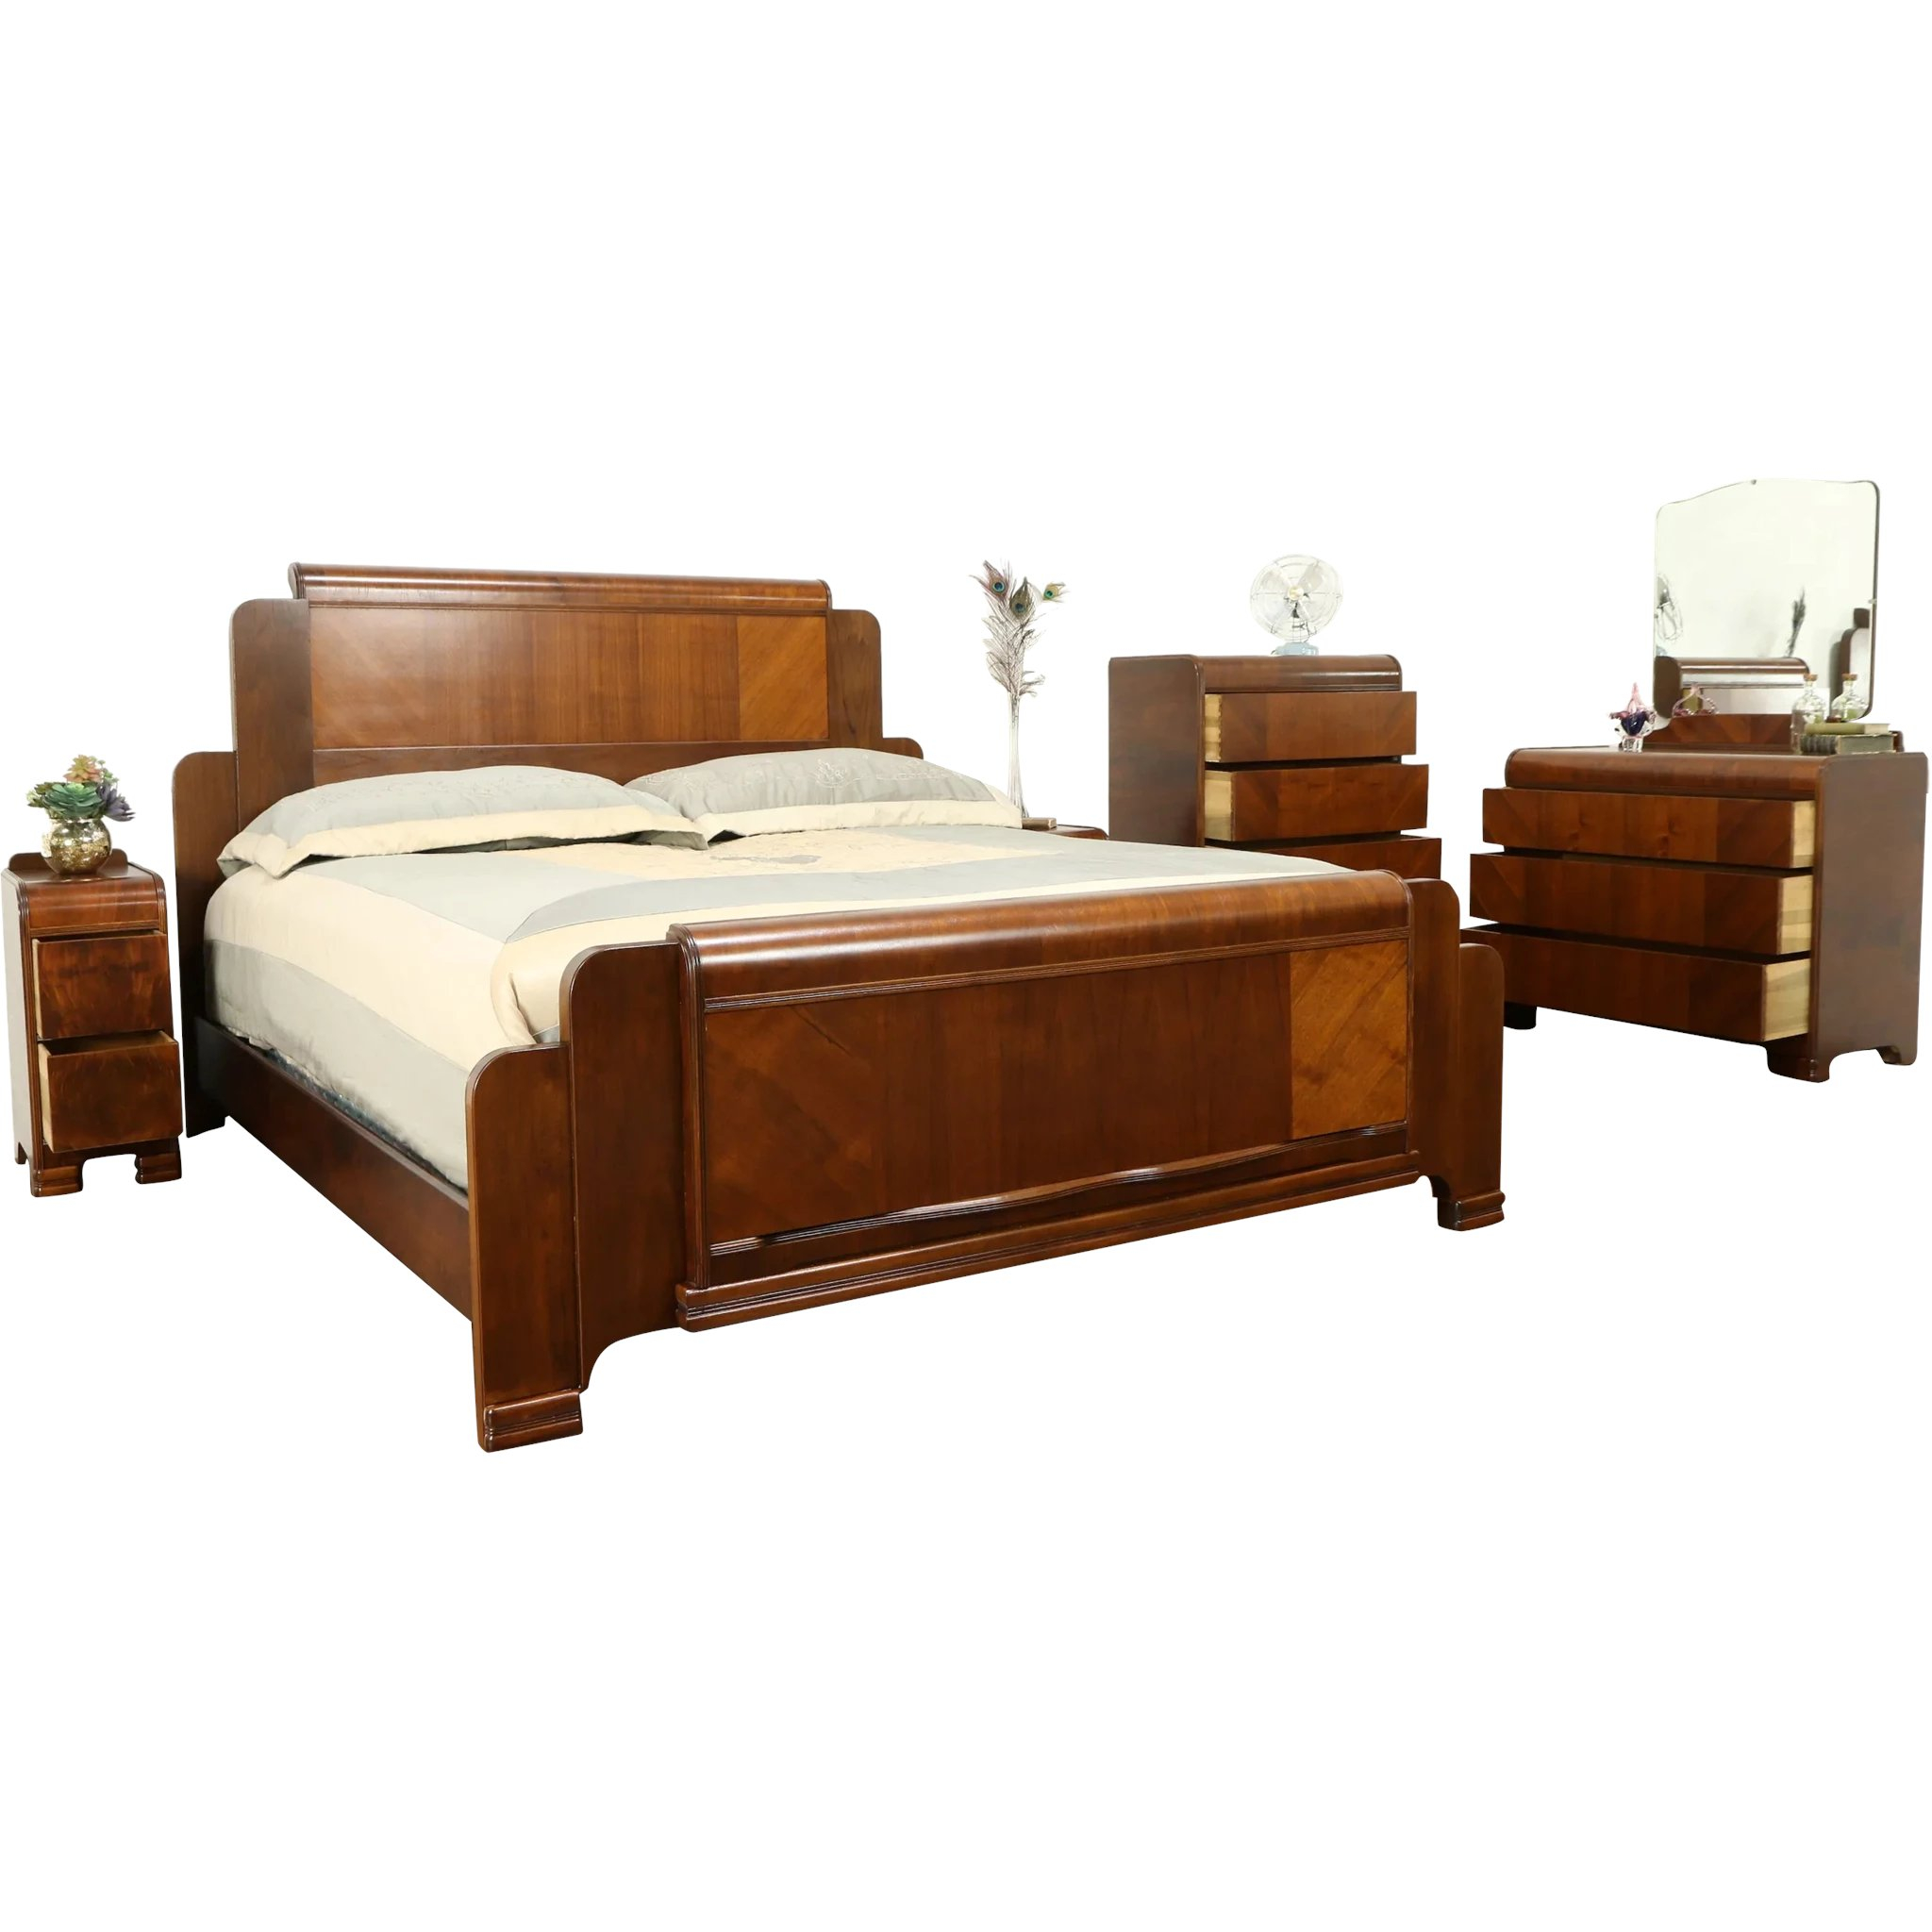 Art Deco Waterfall Design 1940 Vintage 5 Pc Bedroom Set King Size Bed 31163 pertaining to size 2048 X 2048